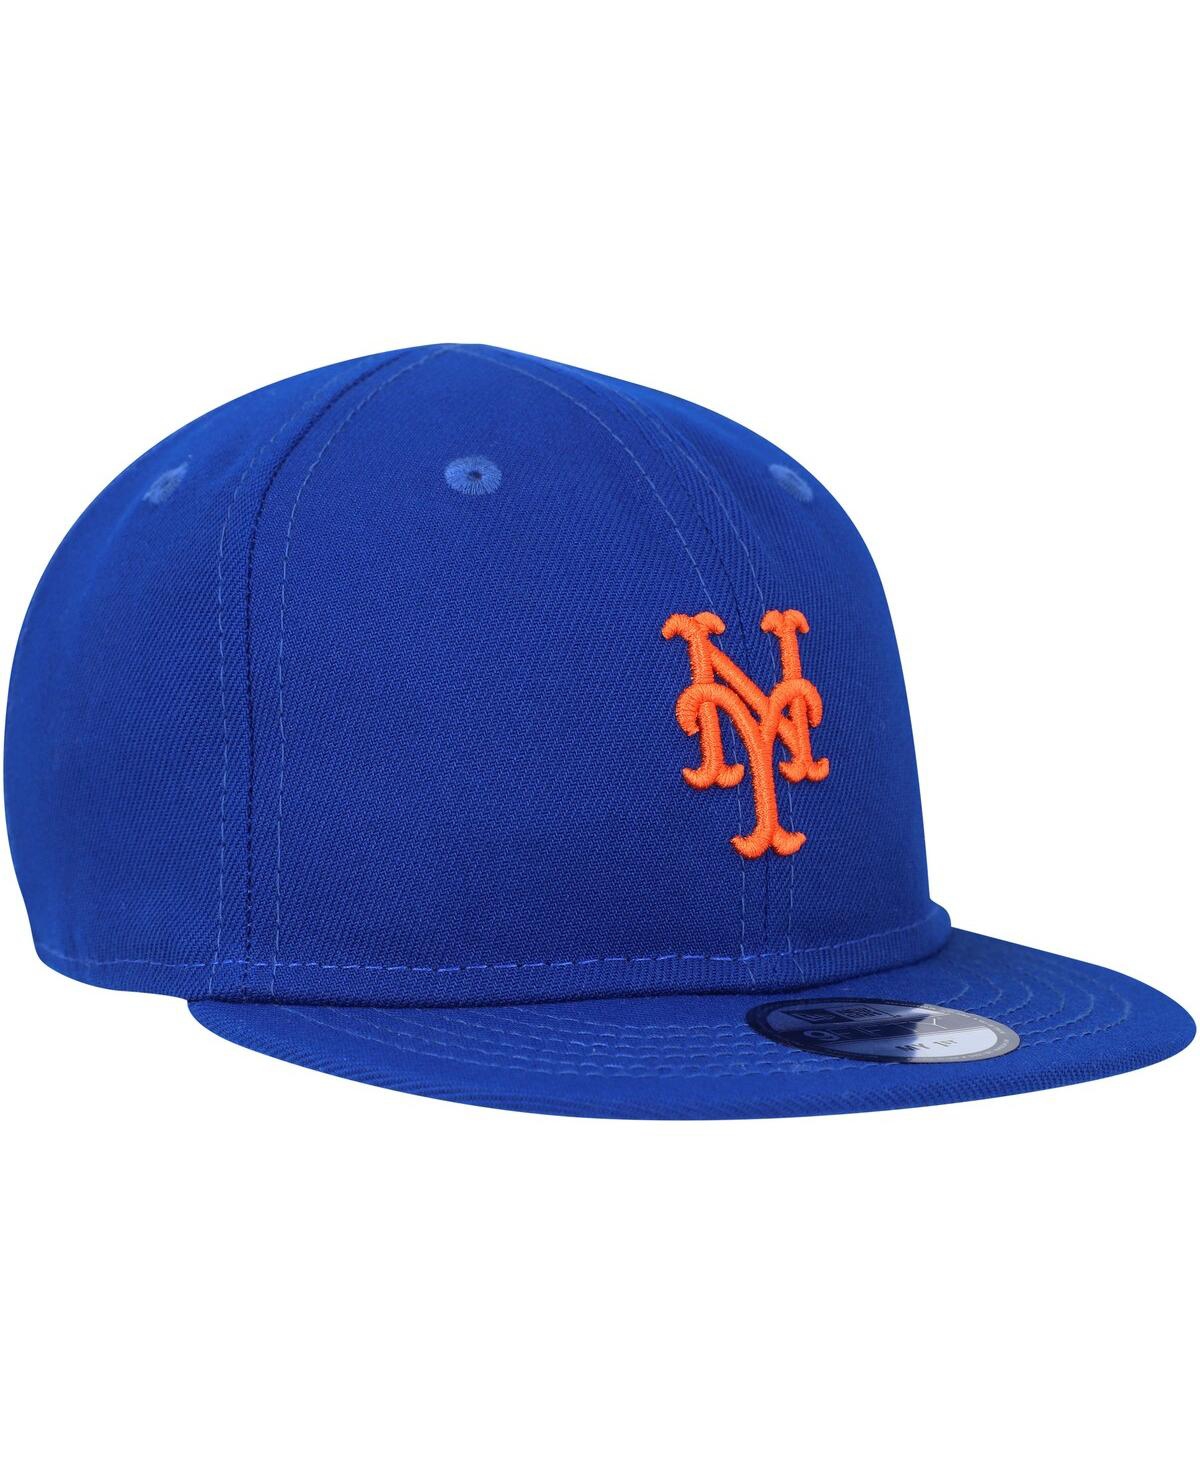 Shop New Era Infant Boys And Girls  Royal New York Mets My First 9fifty Adjustable Hat